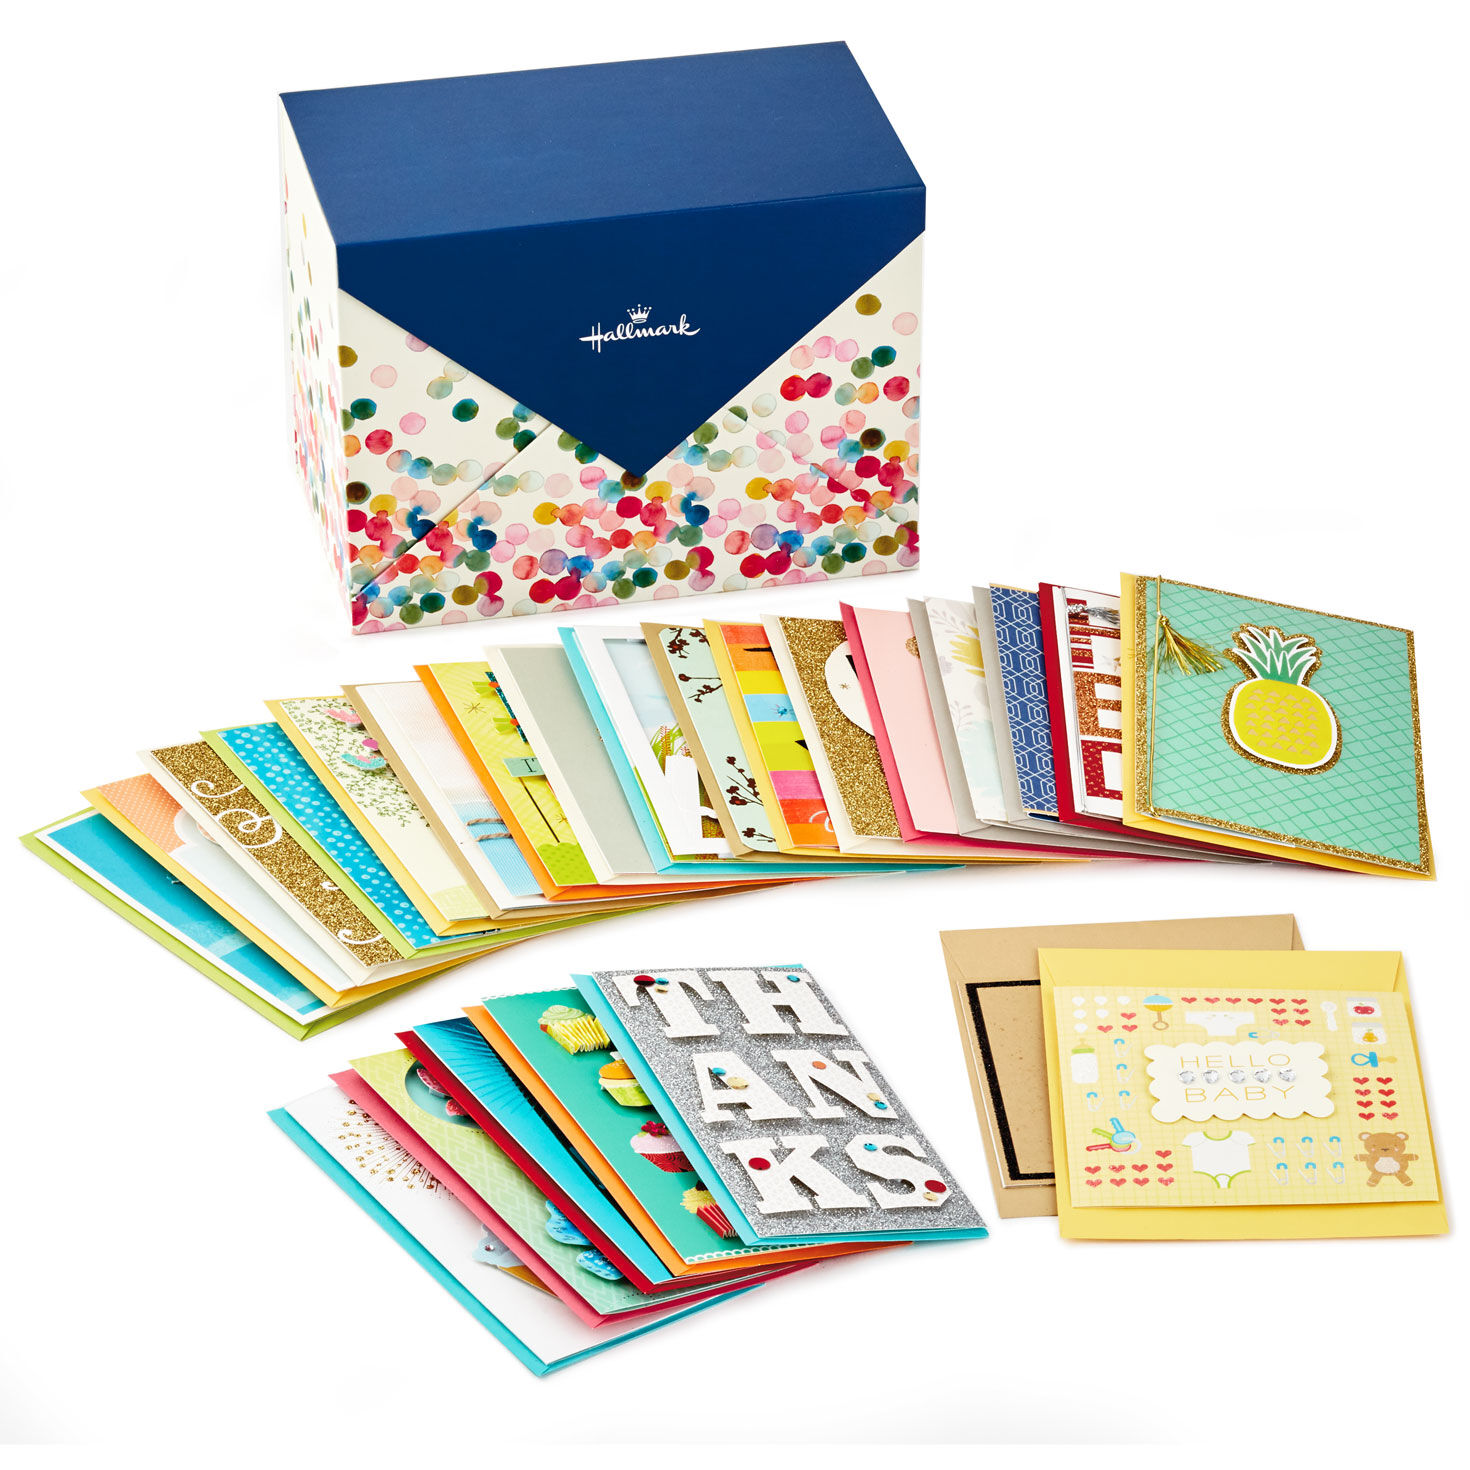 Box of 24 Pera Online Assorted All-Occasion Cards in Polka Dot Organizer Box